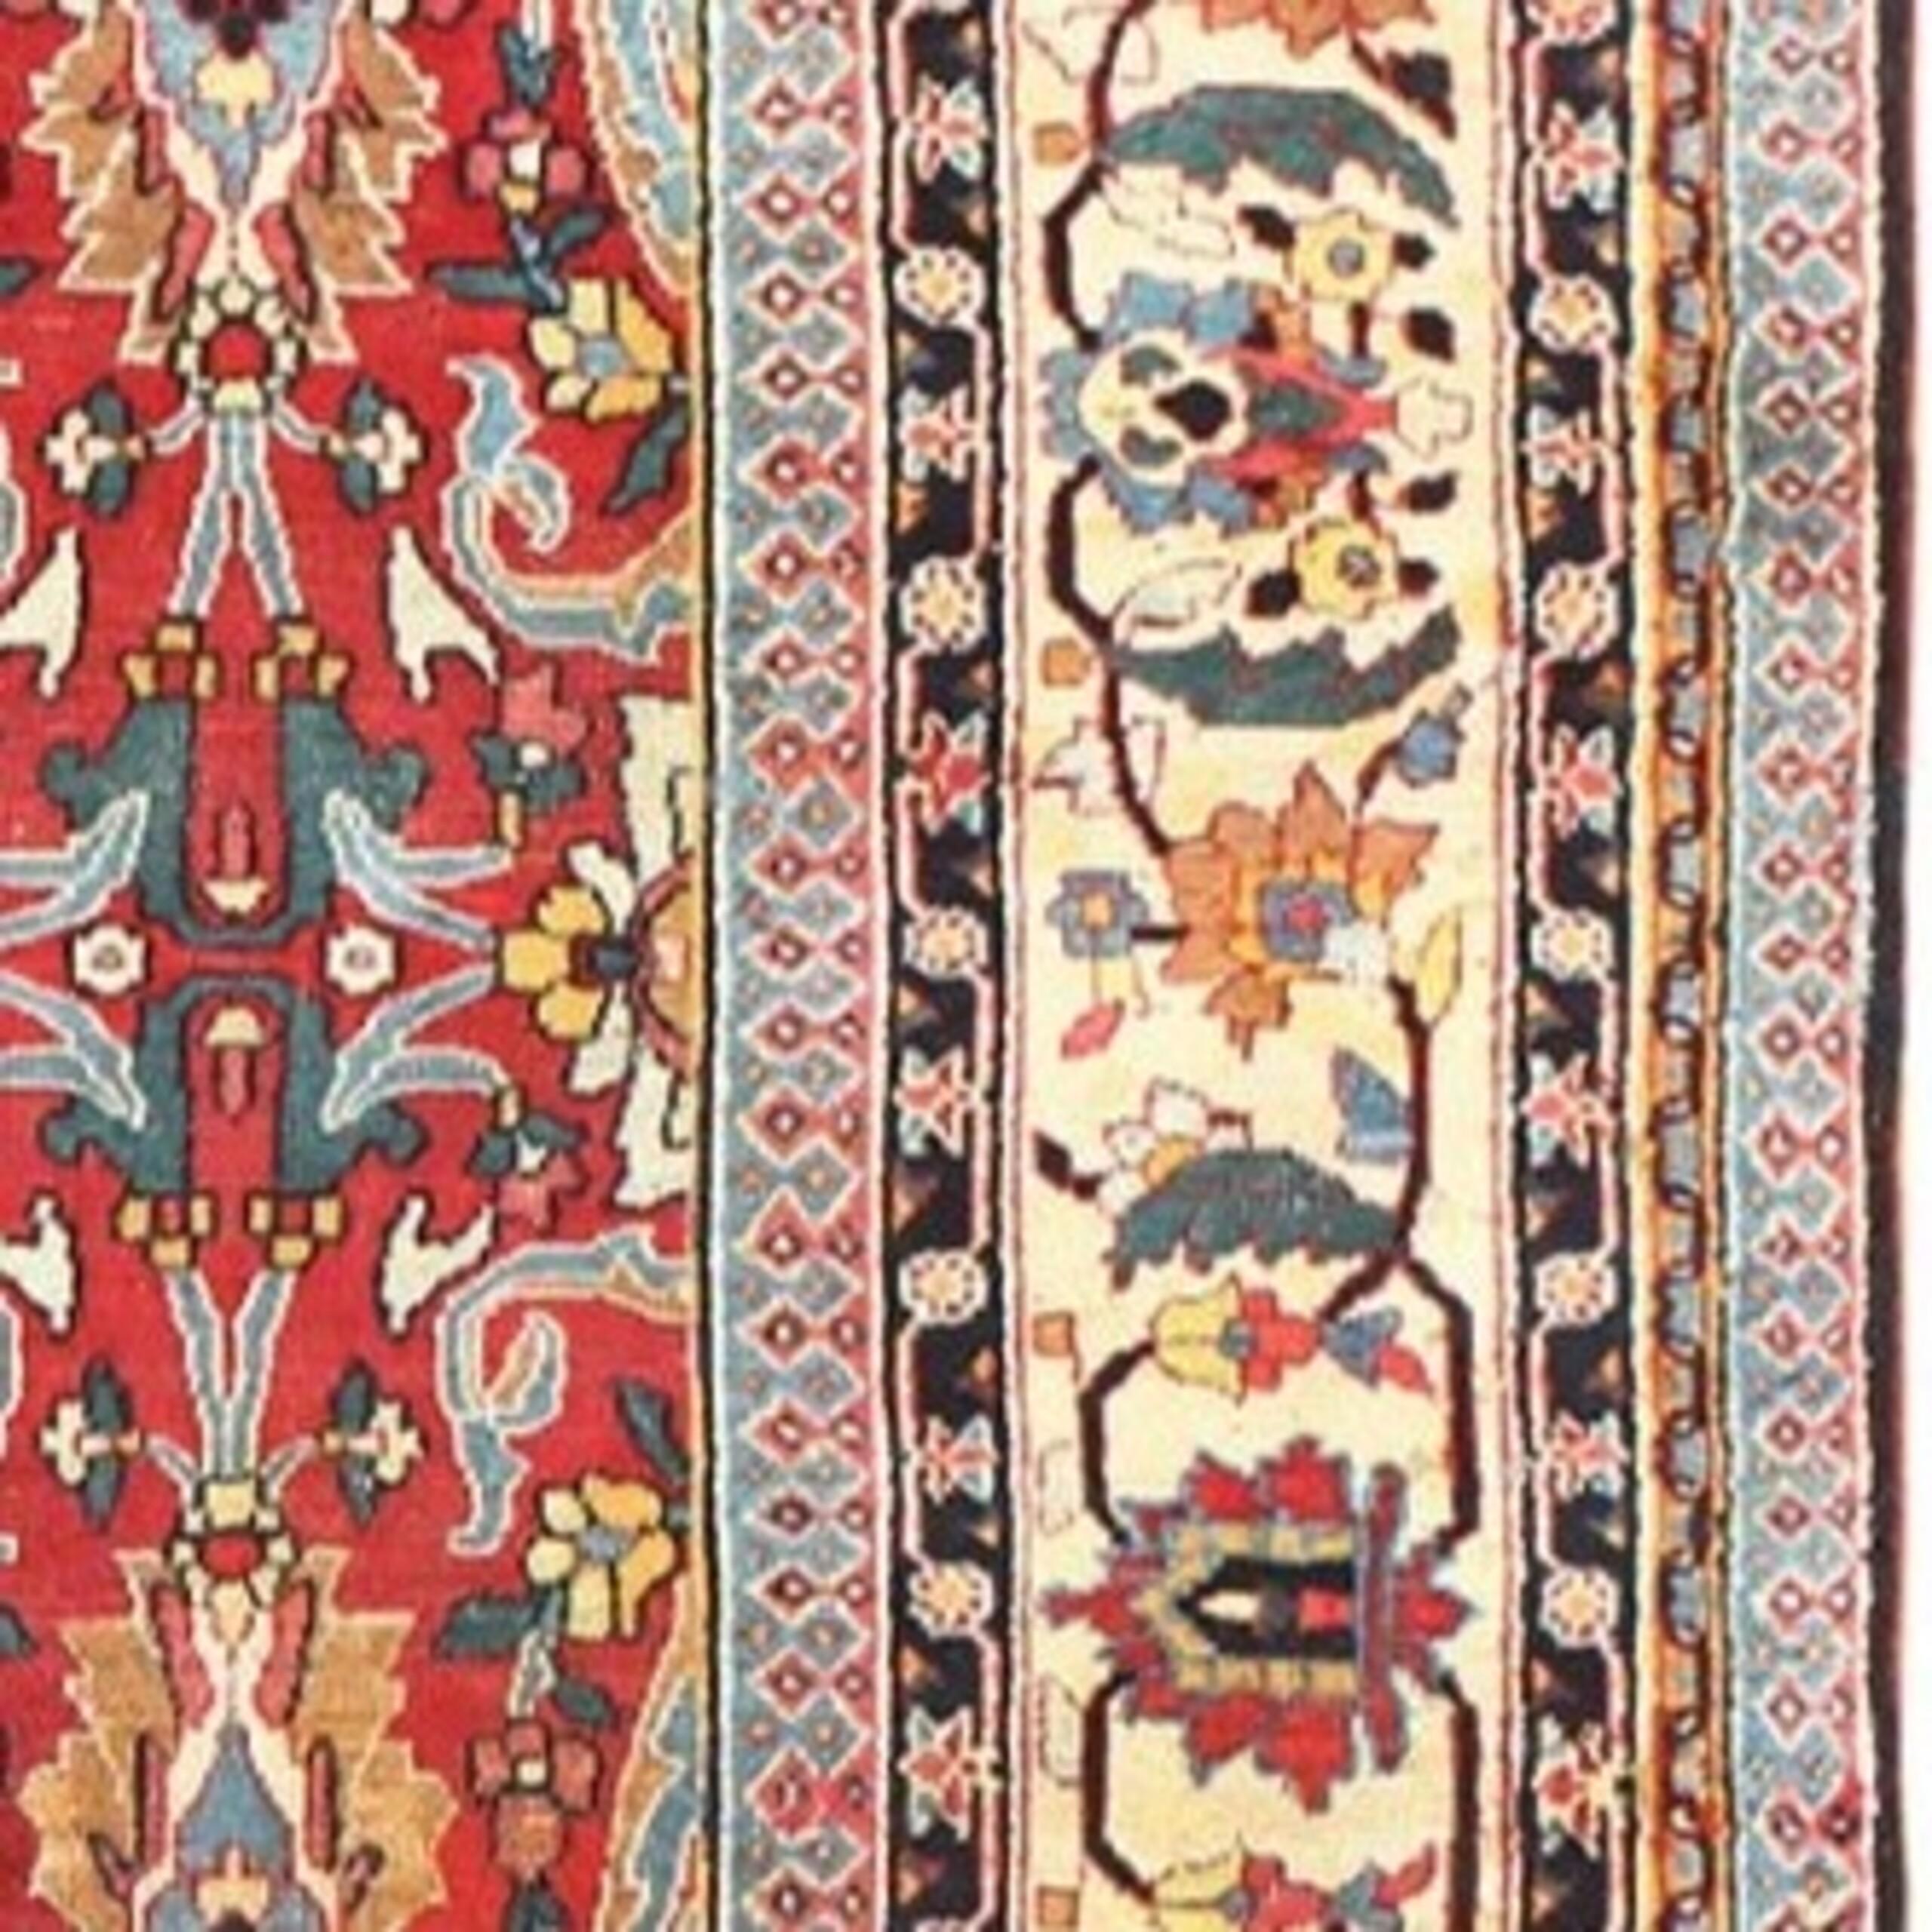 Red Background All Over Design Antique Persian Khorassan Rug, Country of Origin: Persia, Circa Date: Late 19th Century – This antique Persian Khorassan rug features a floral patterns form an all-over design that is centered with a vibrant red-backed